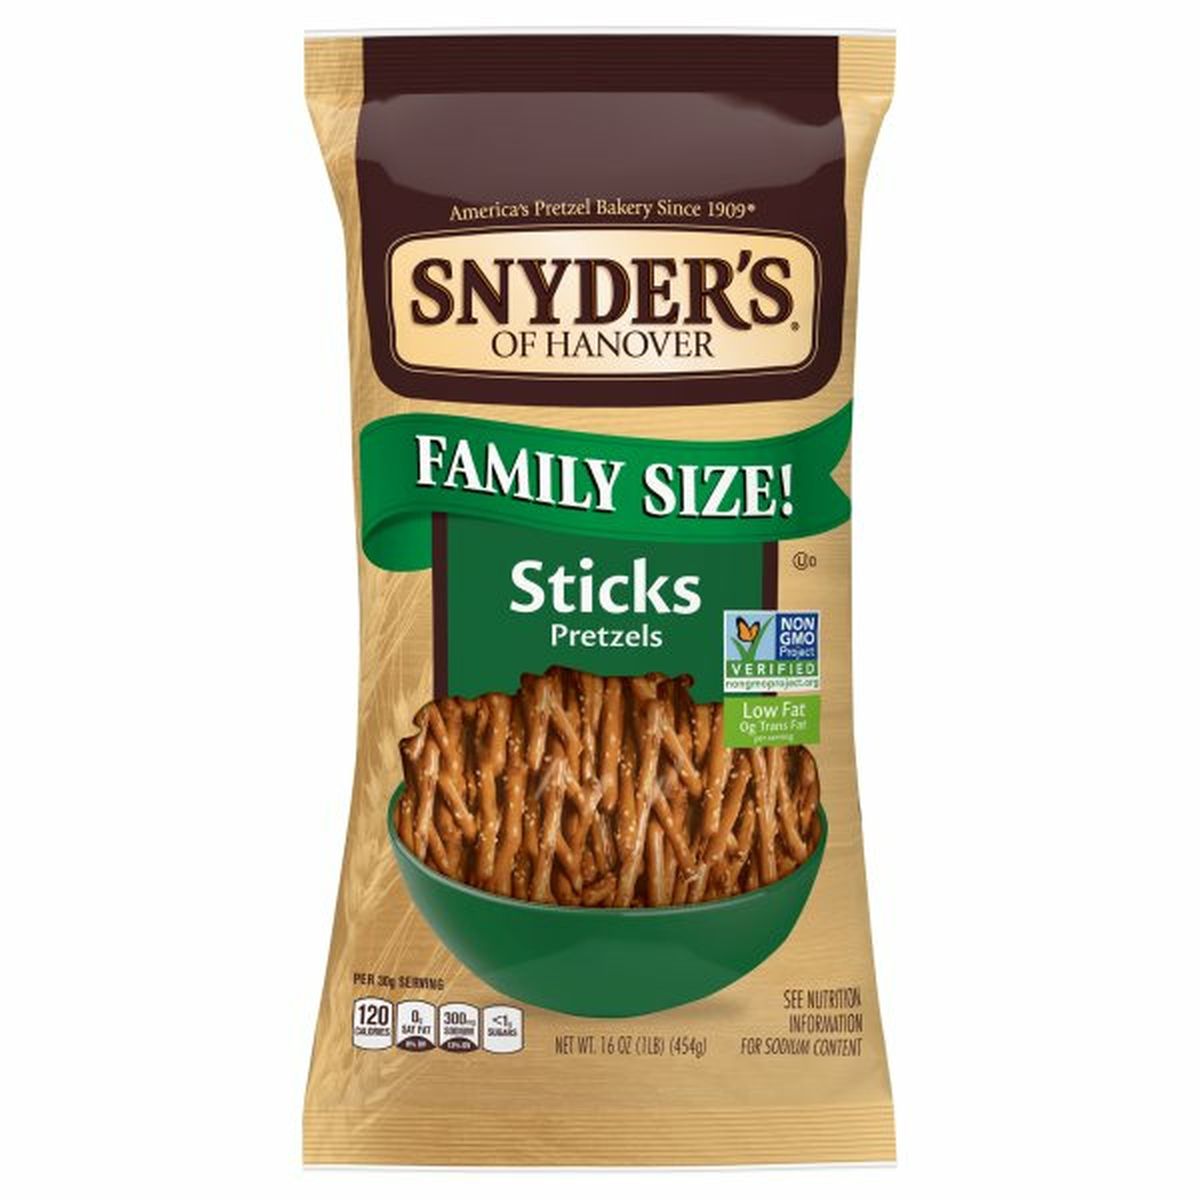 Calories in Snyder's of Hanovers Pretzel Sticks, Family Size